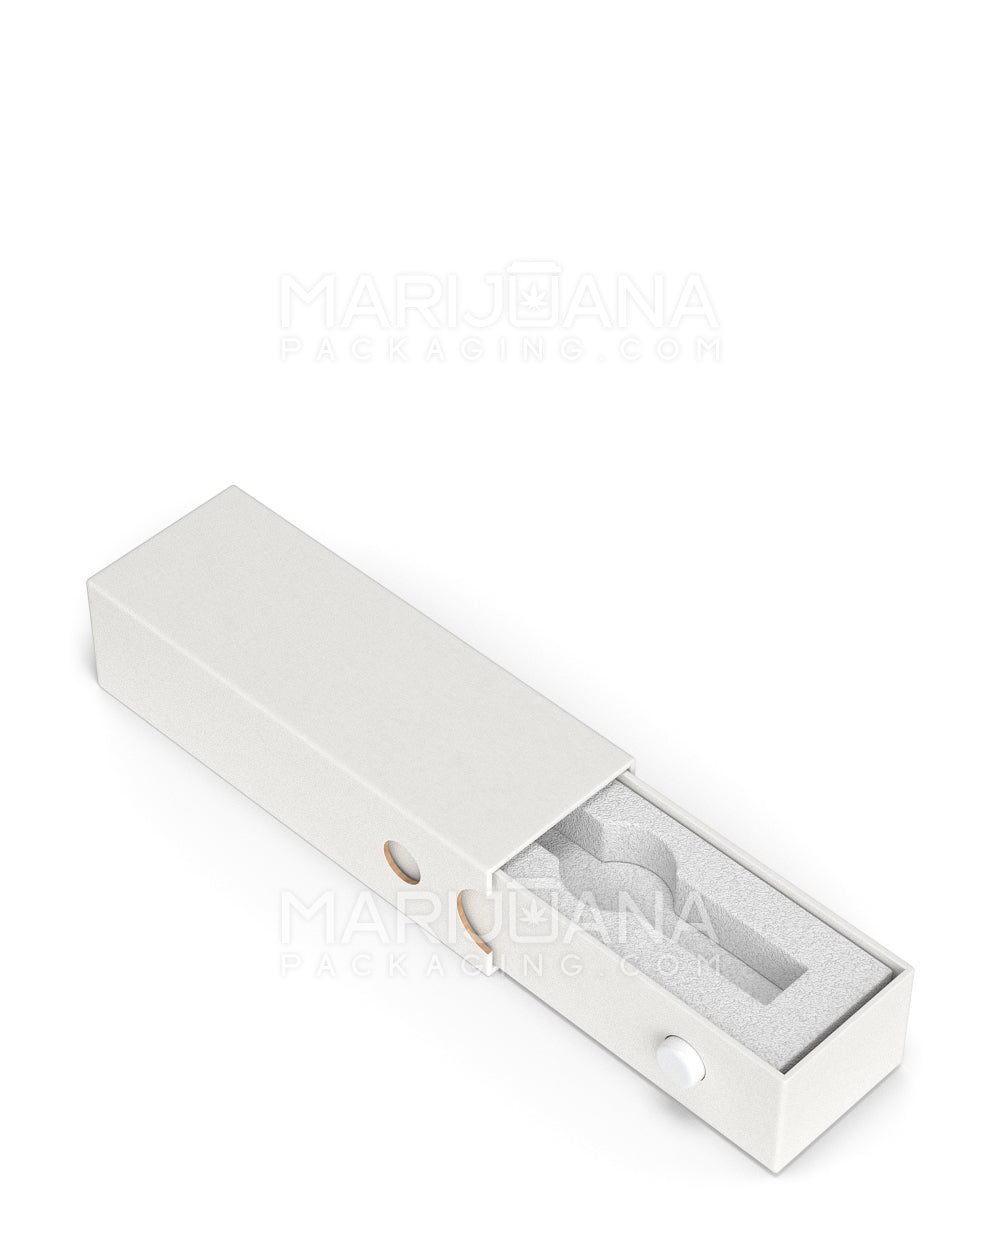 Child Resistant & Sustainable | 100% Recyclable Cardboard Vape Cartridge Box w/ Button & Foam Insert | 100mm - White  - 3